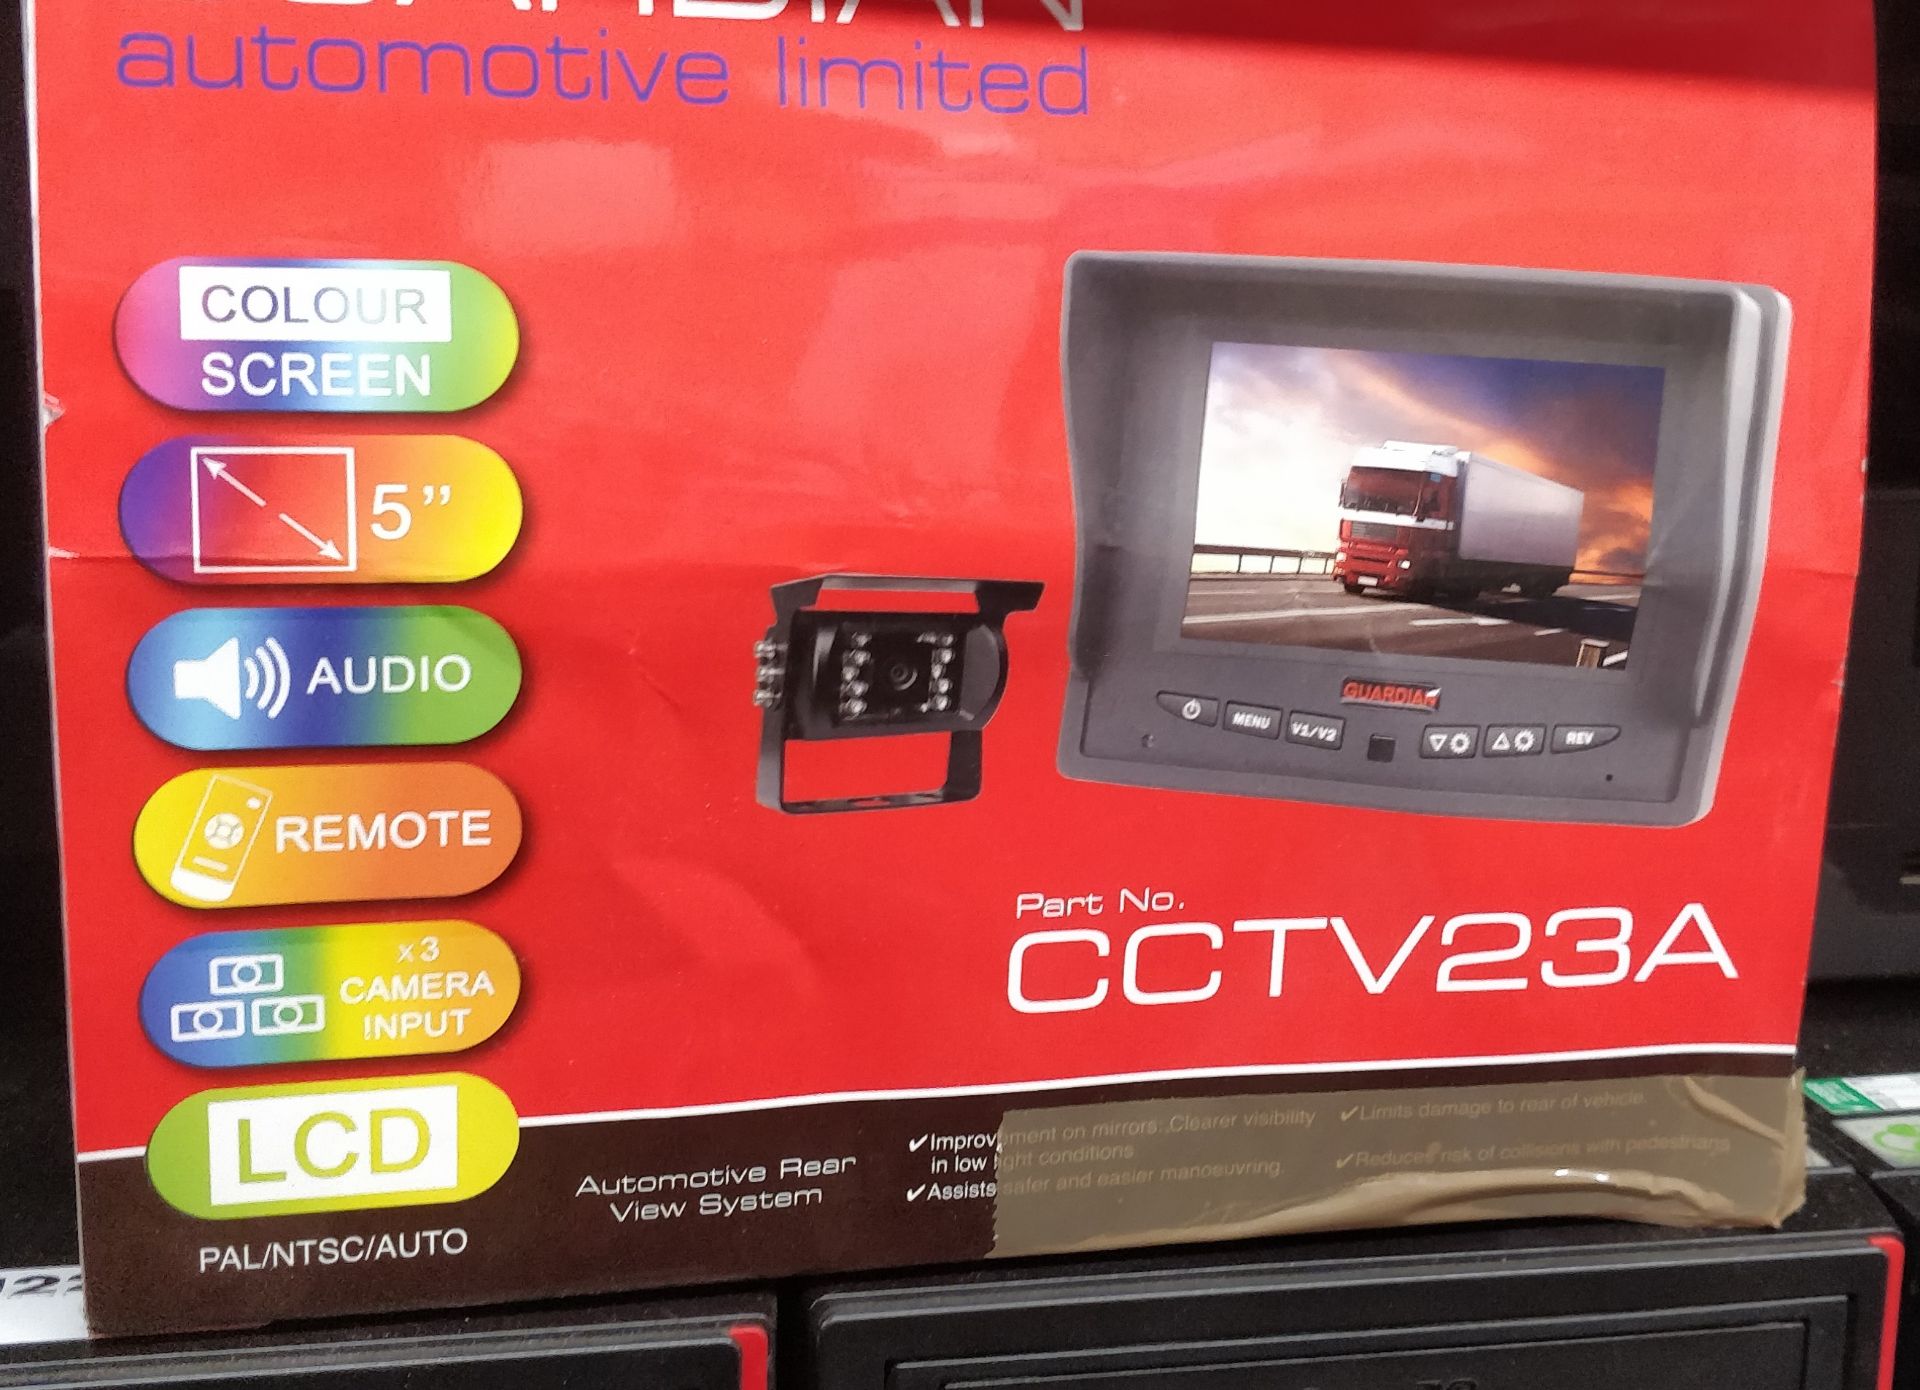 1 x Guardian CCTV23A Reverse Vehicle Camera System With 5 Inch Colour Screen - Ref RB262 G3 - New